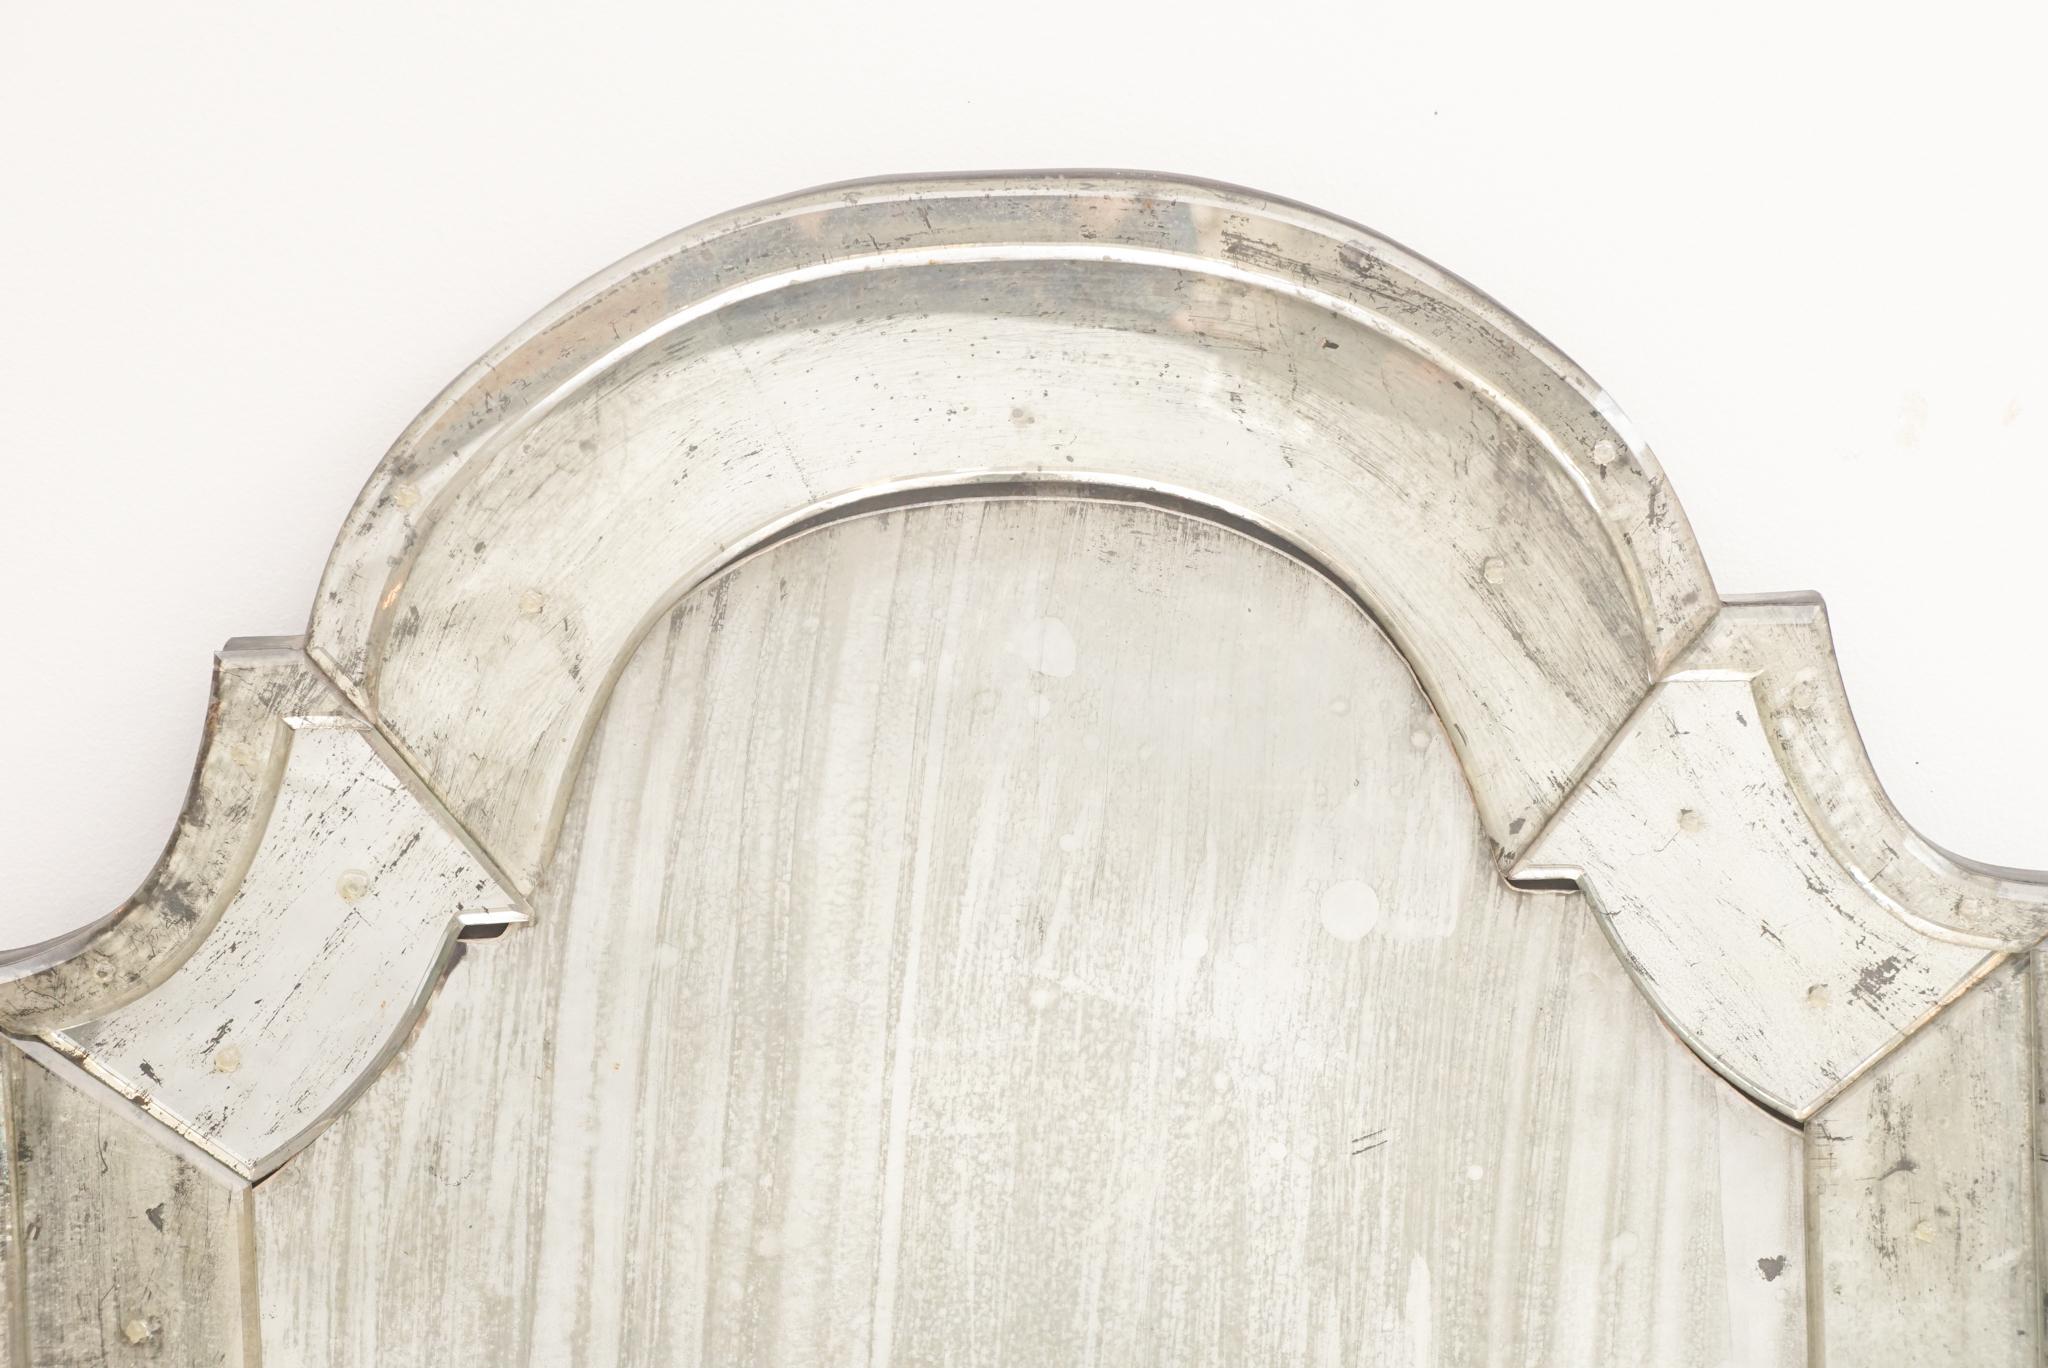 The Venetian-style wall mirror, shown here, was made in the 1940s. Featuring an antiqued mirror center pane, the piece is distinguished by its arched top design, and wide mirrored-glass border. Perfectly proportioned for an entry way, powder room or